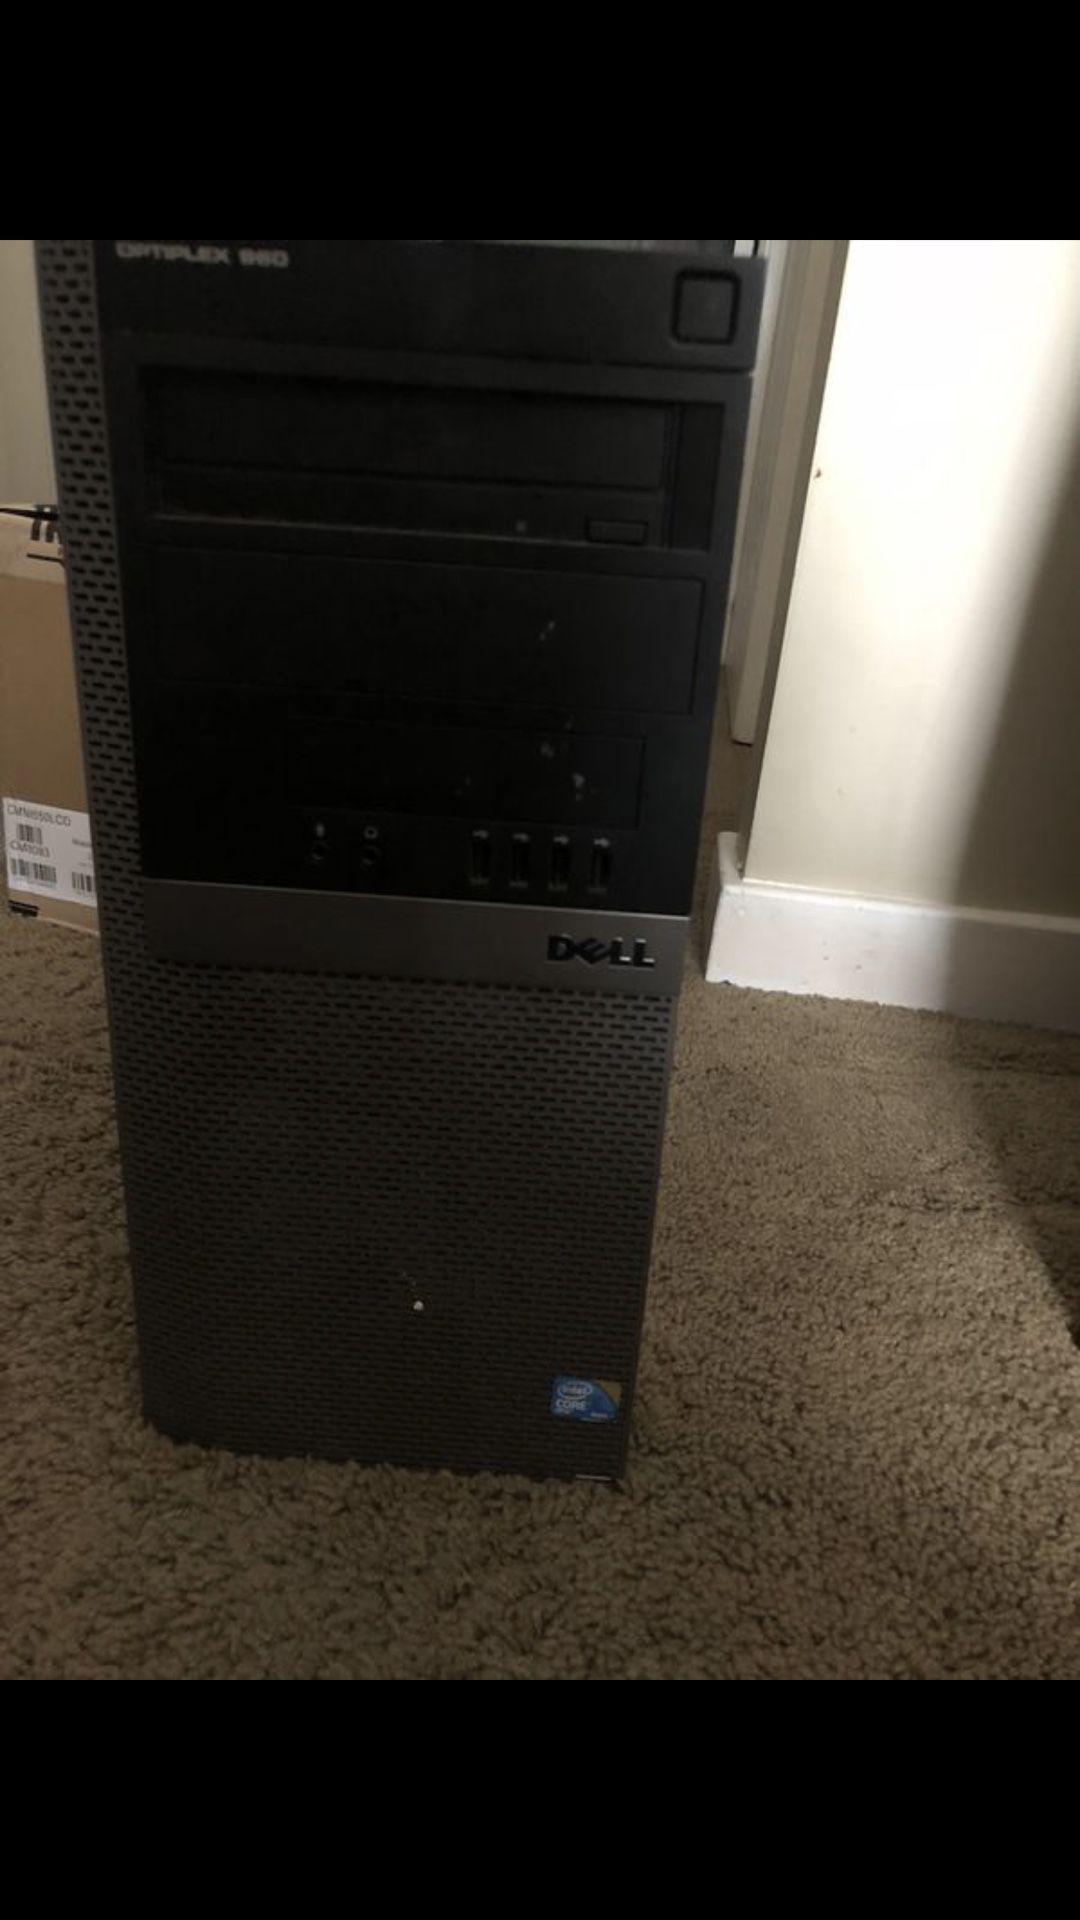 Dell optiplex 960 desktop computer with core vpro, ssd solid state hard drive.